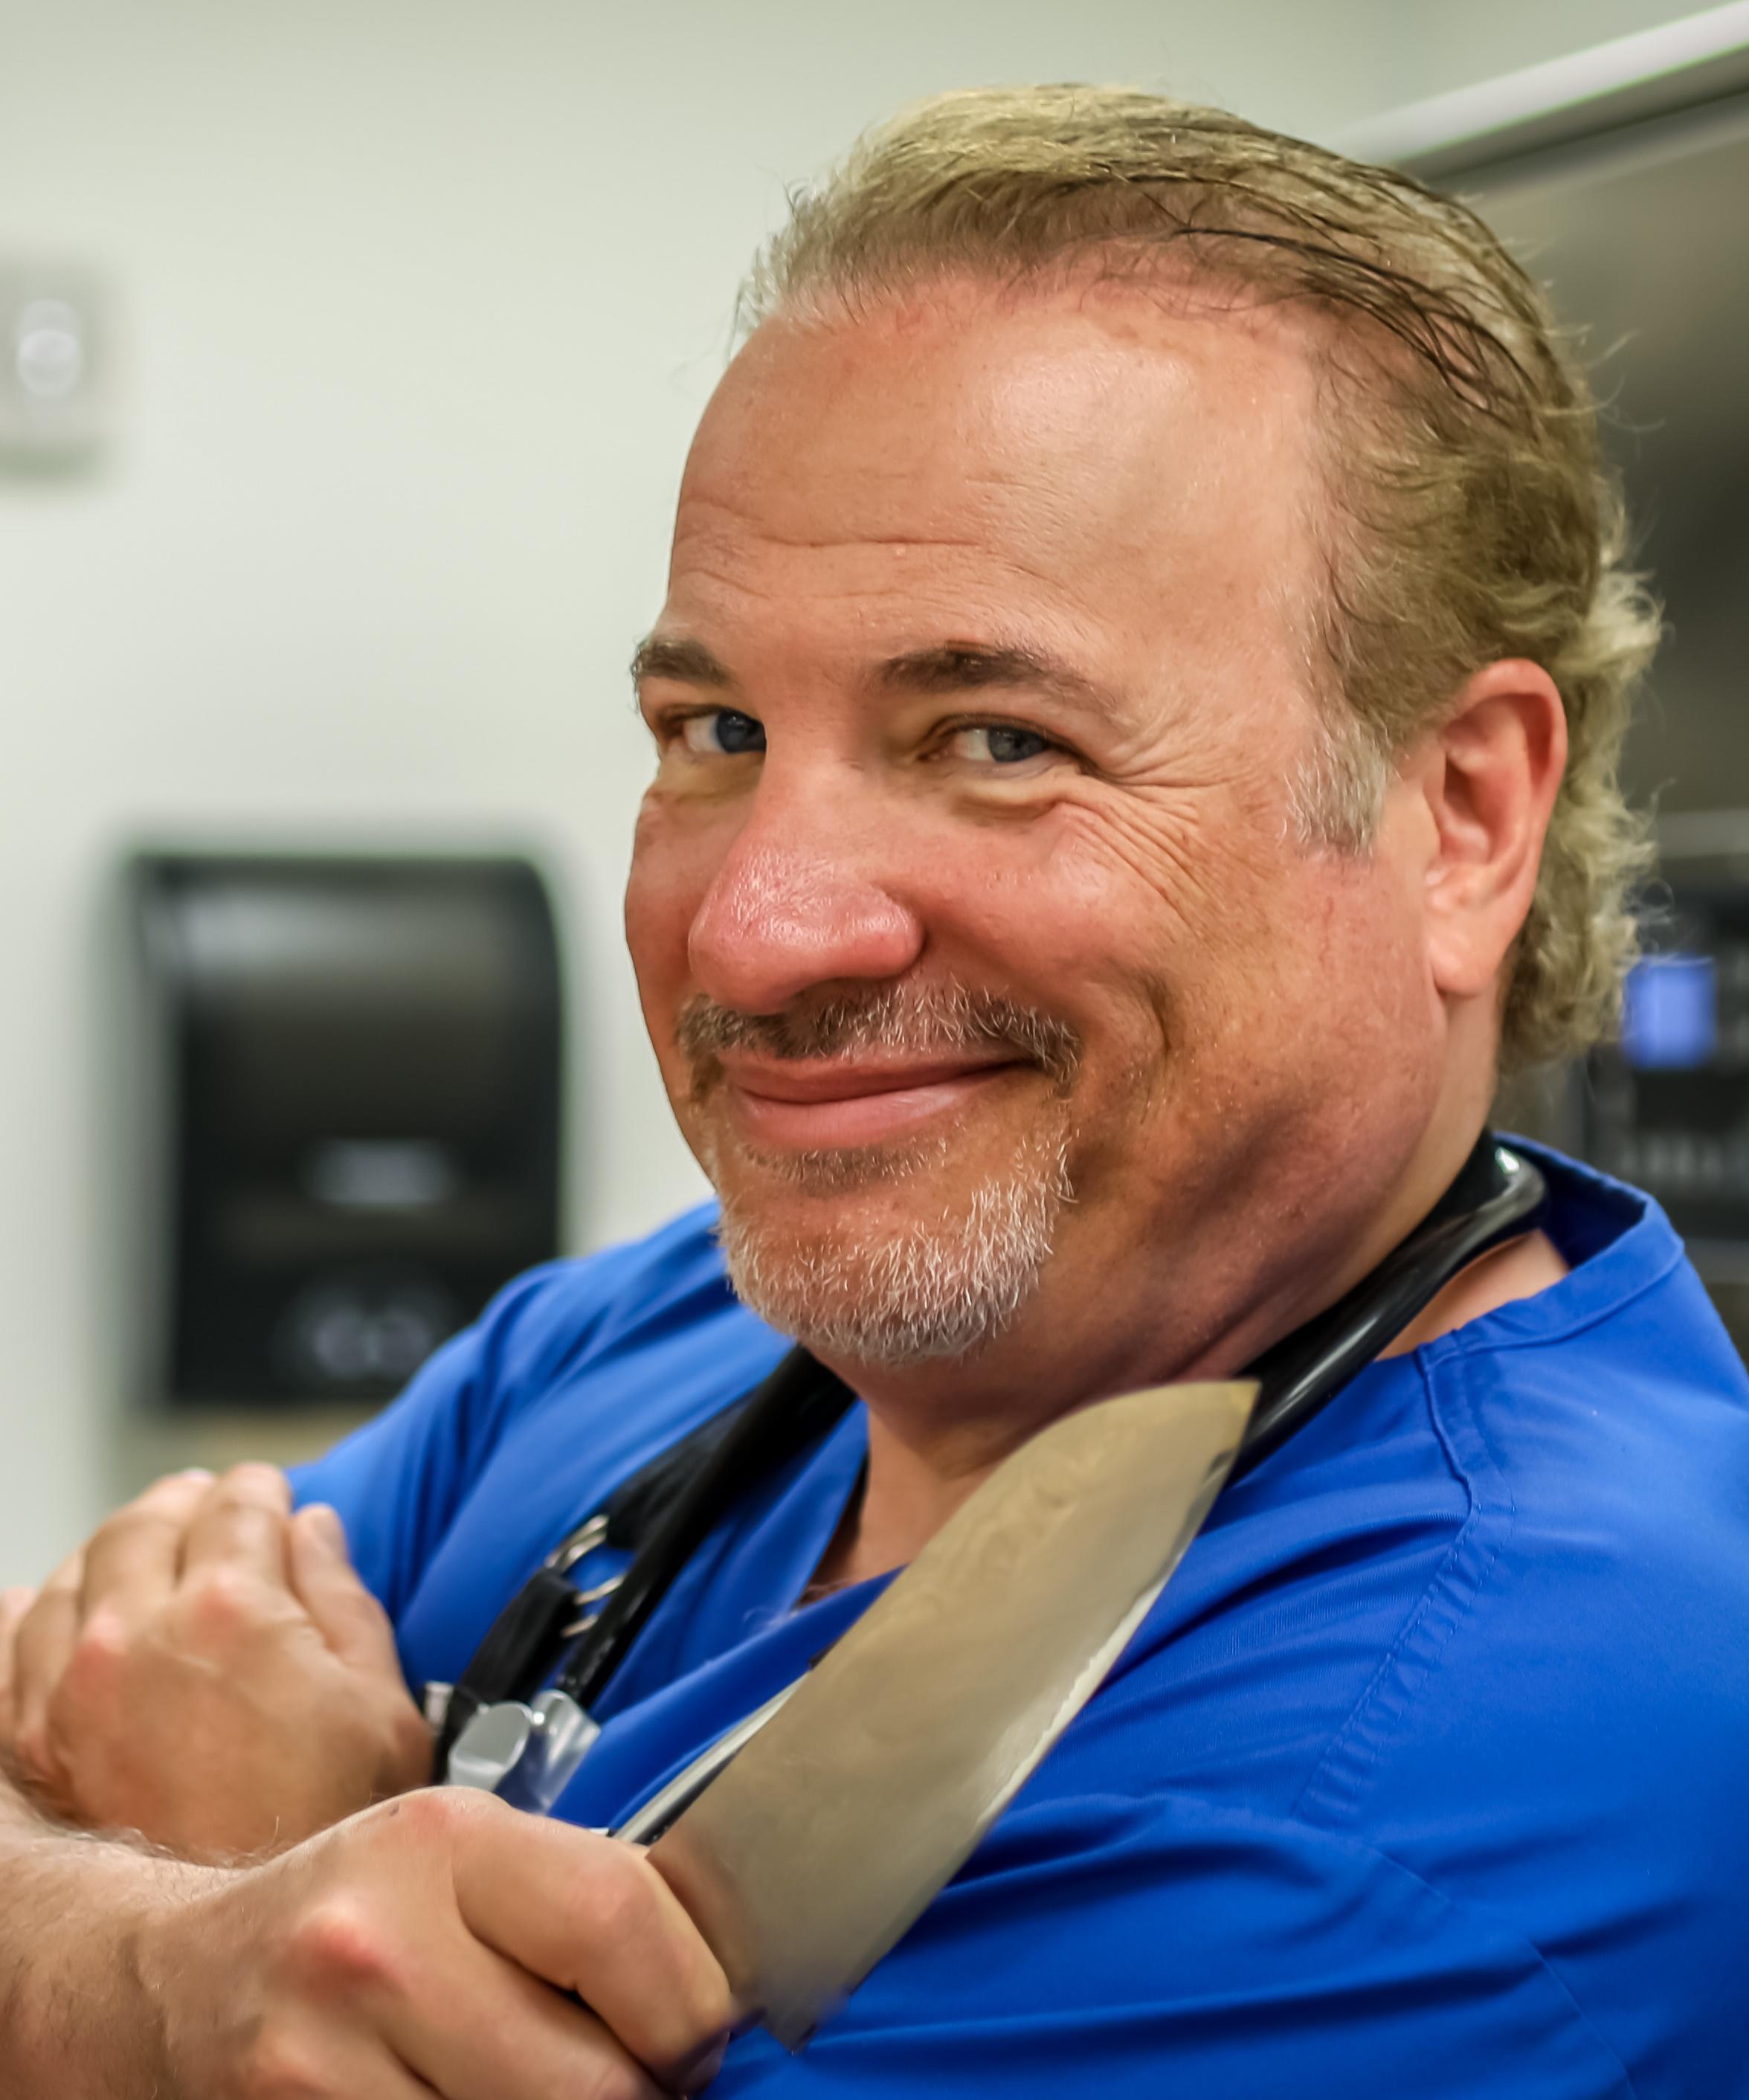 Image of Chef Dr. Mike holding a chef's knife and smiling